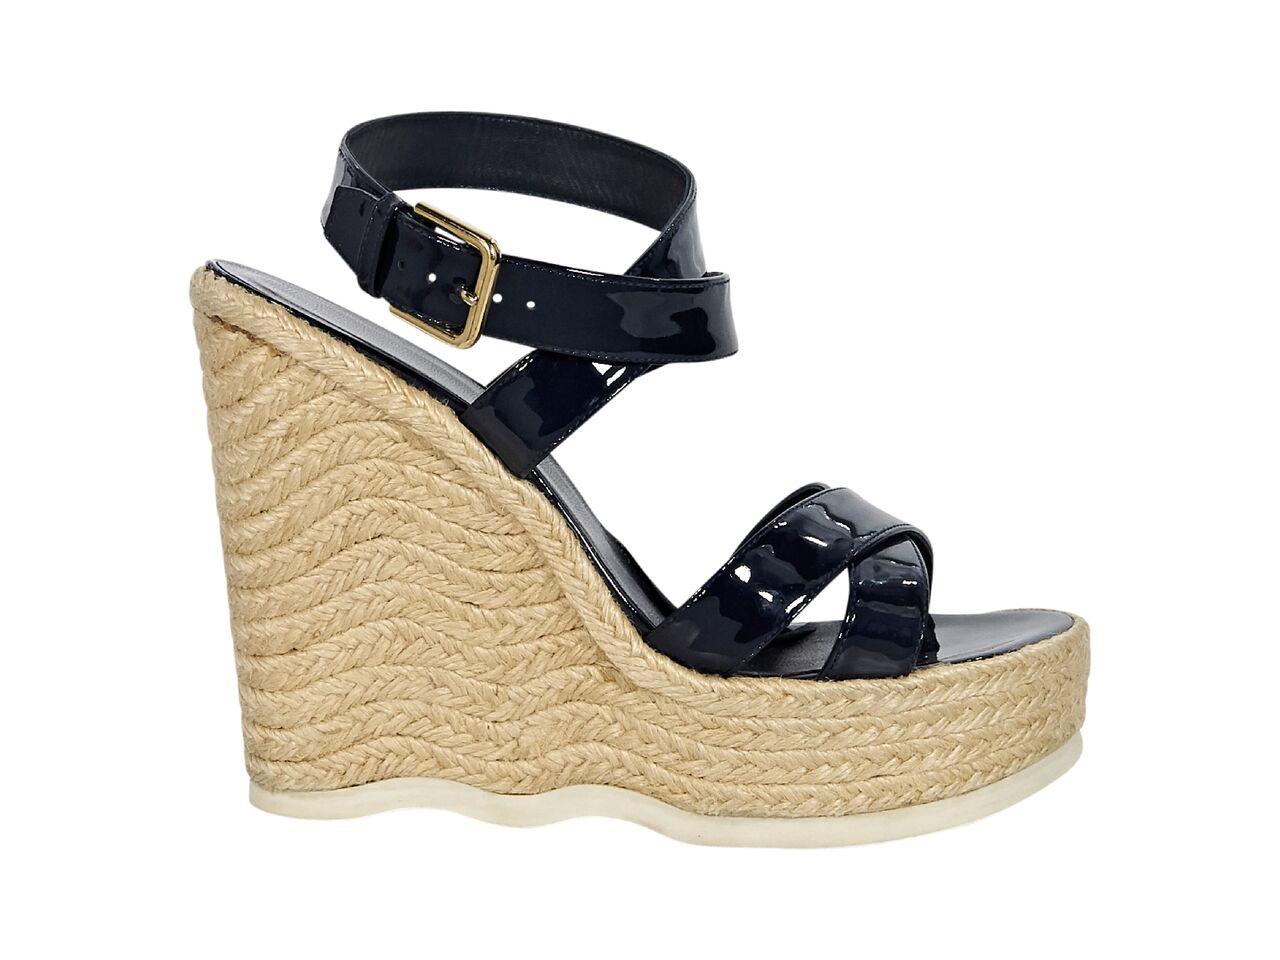 Product details:  Navy blue patent leather strappy wedge espadrille sandals by Yves Saint Laurent.  Adjustable ankle strap.  Open toe.  Goldtone hardware.  5